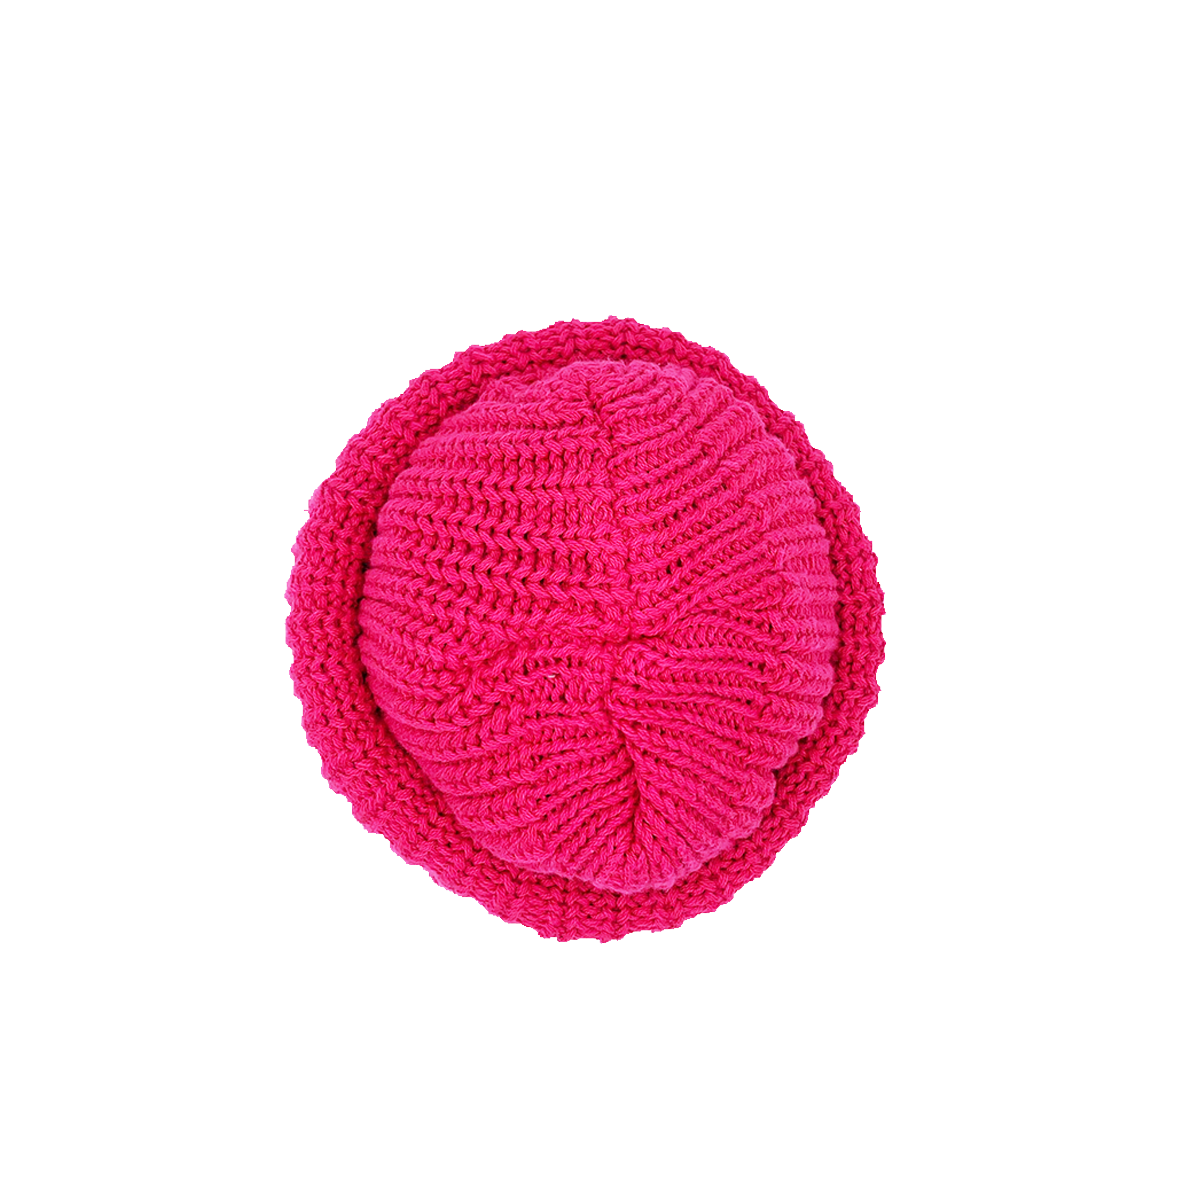 Double Cuff Large Knit Beanie (Magenta Pink)